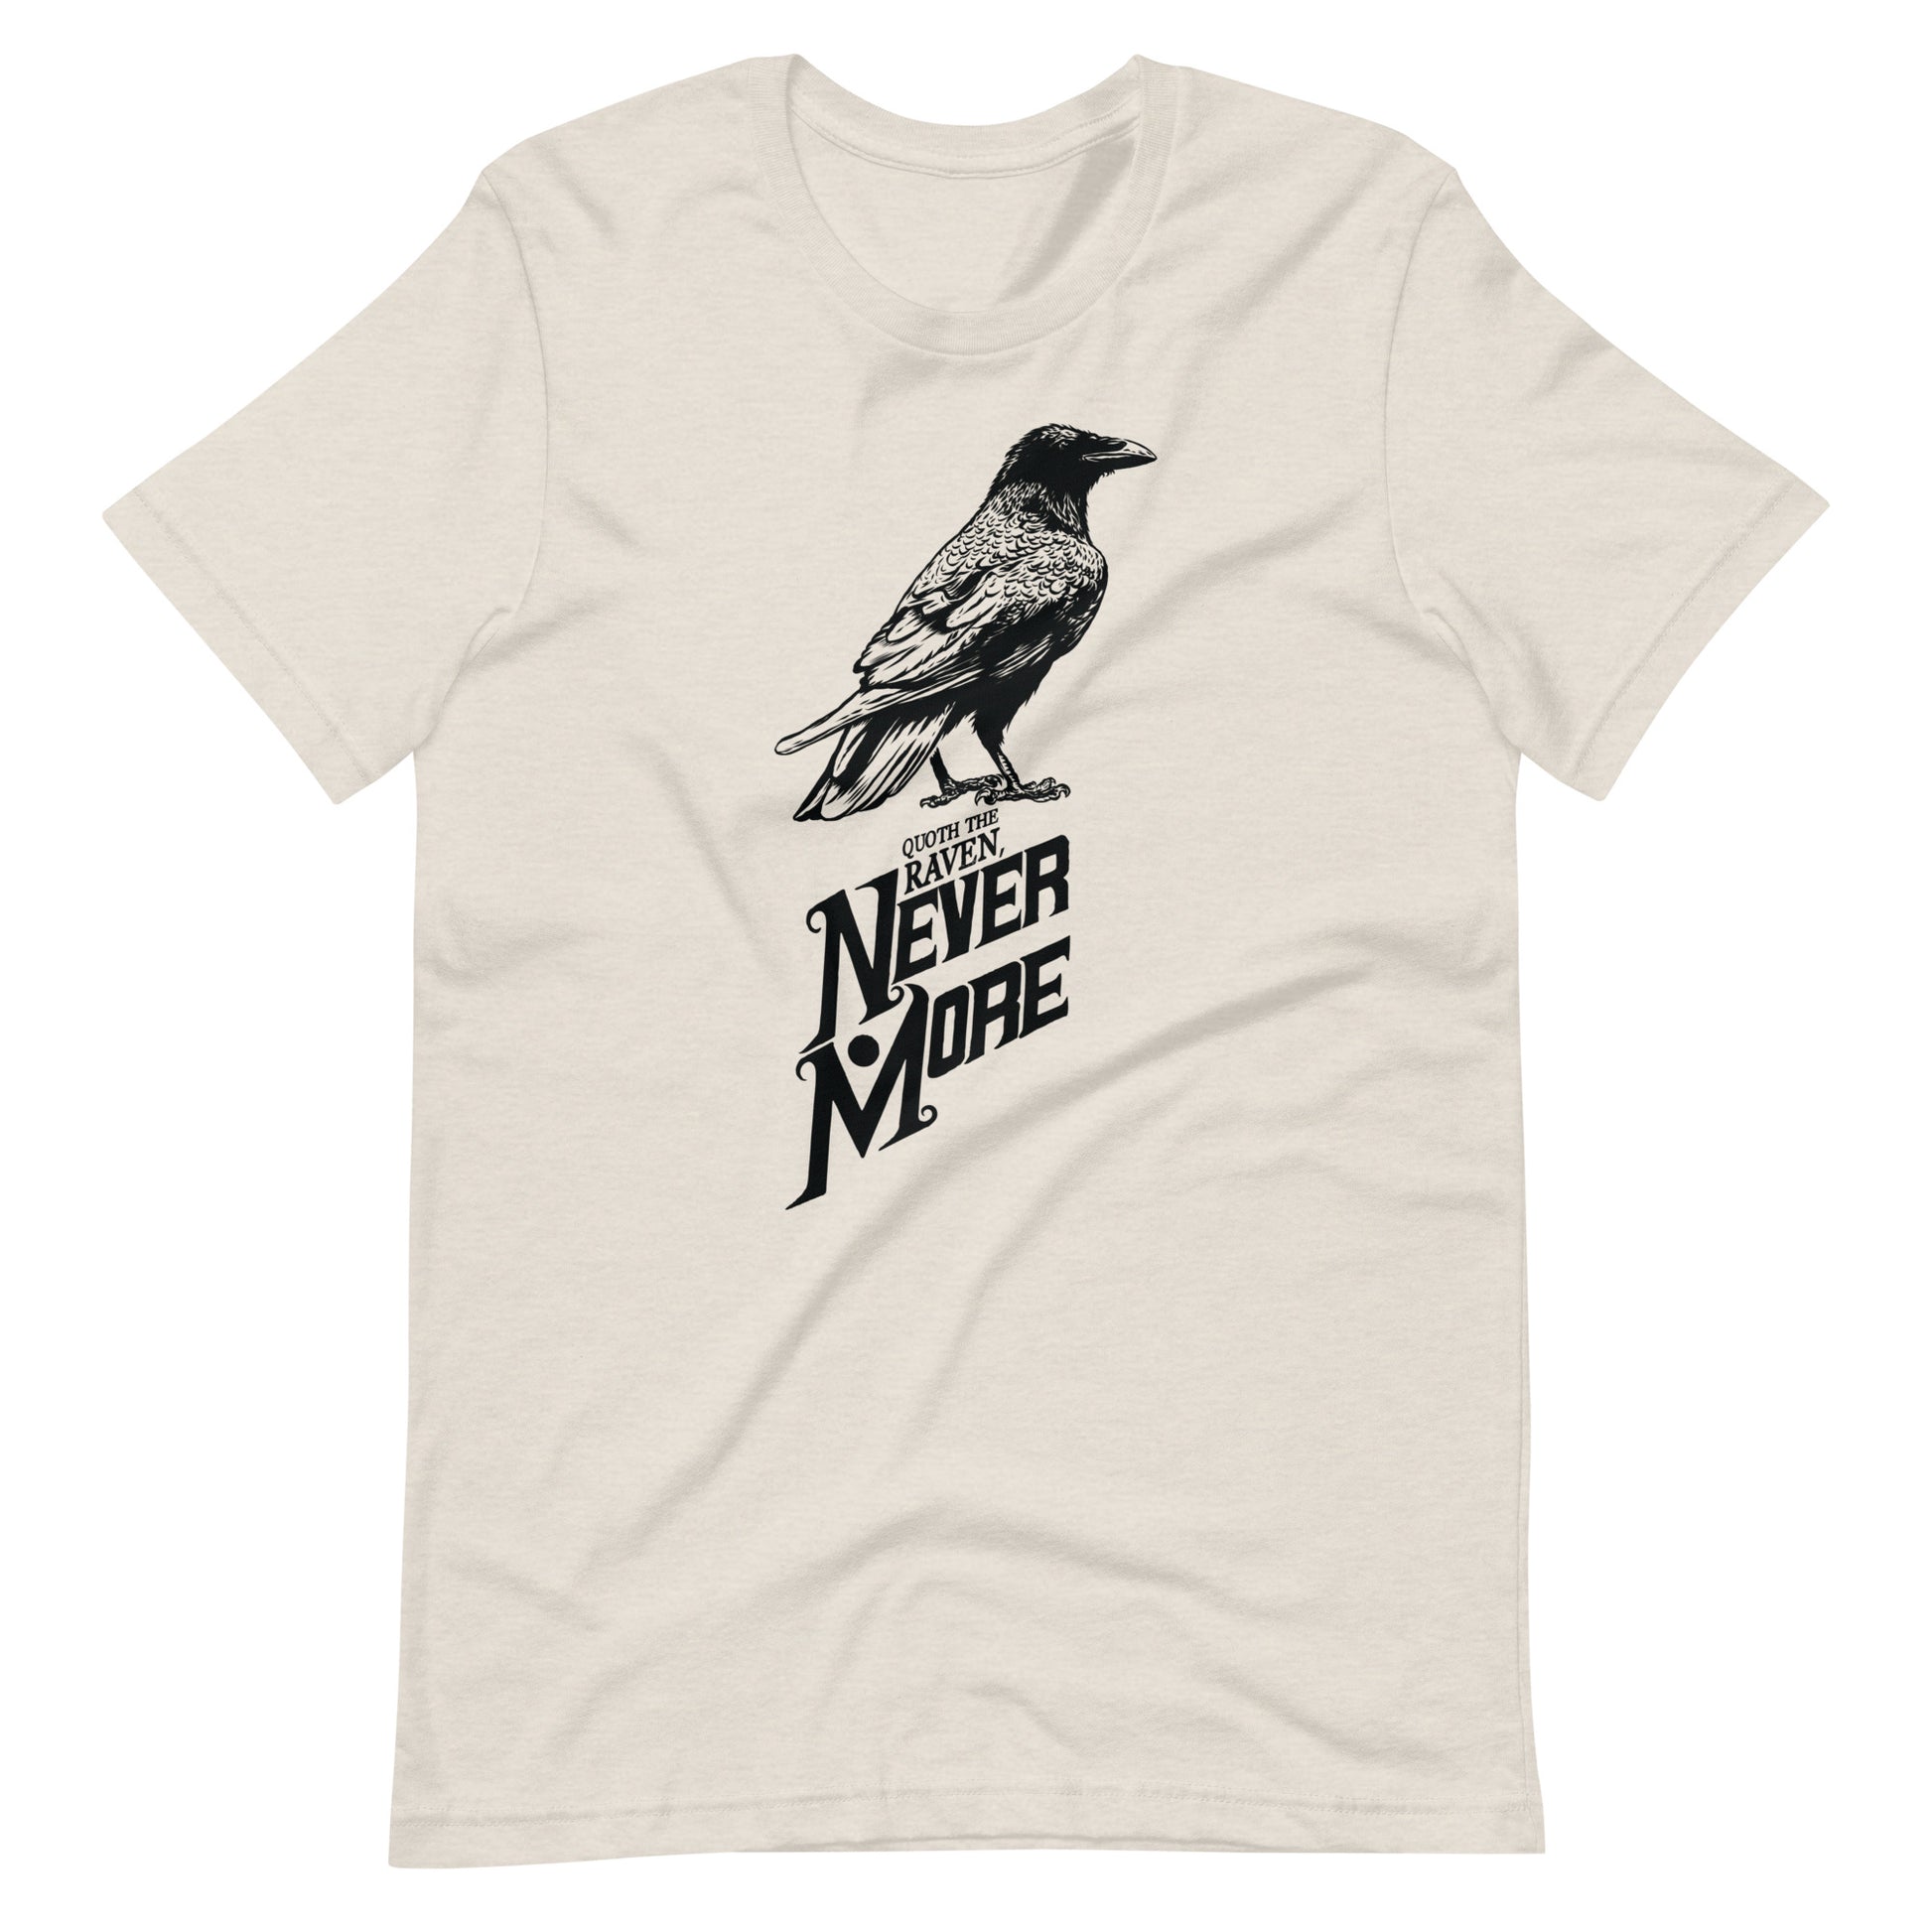 Quoth the Raven Nevermore - Men's t-shirt - Heather Dust Front